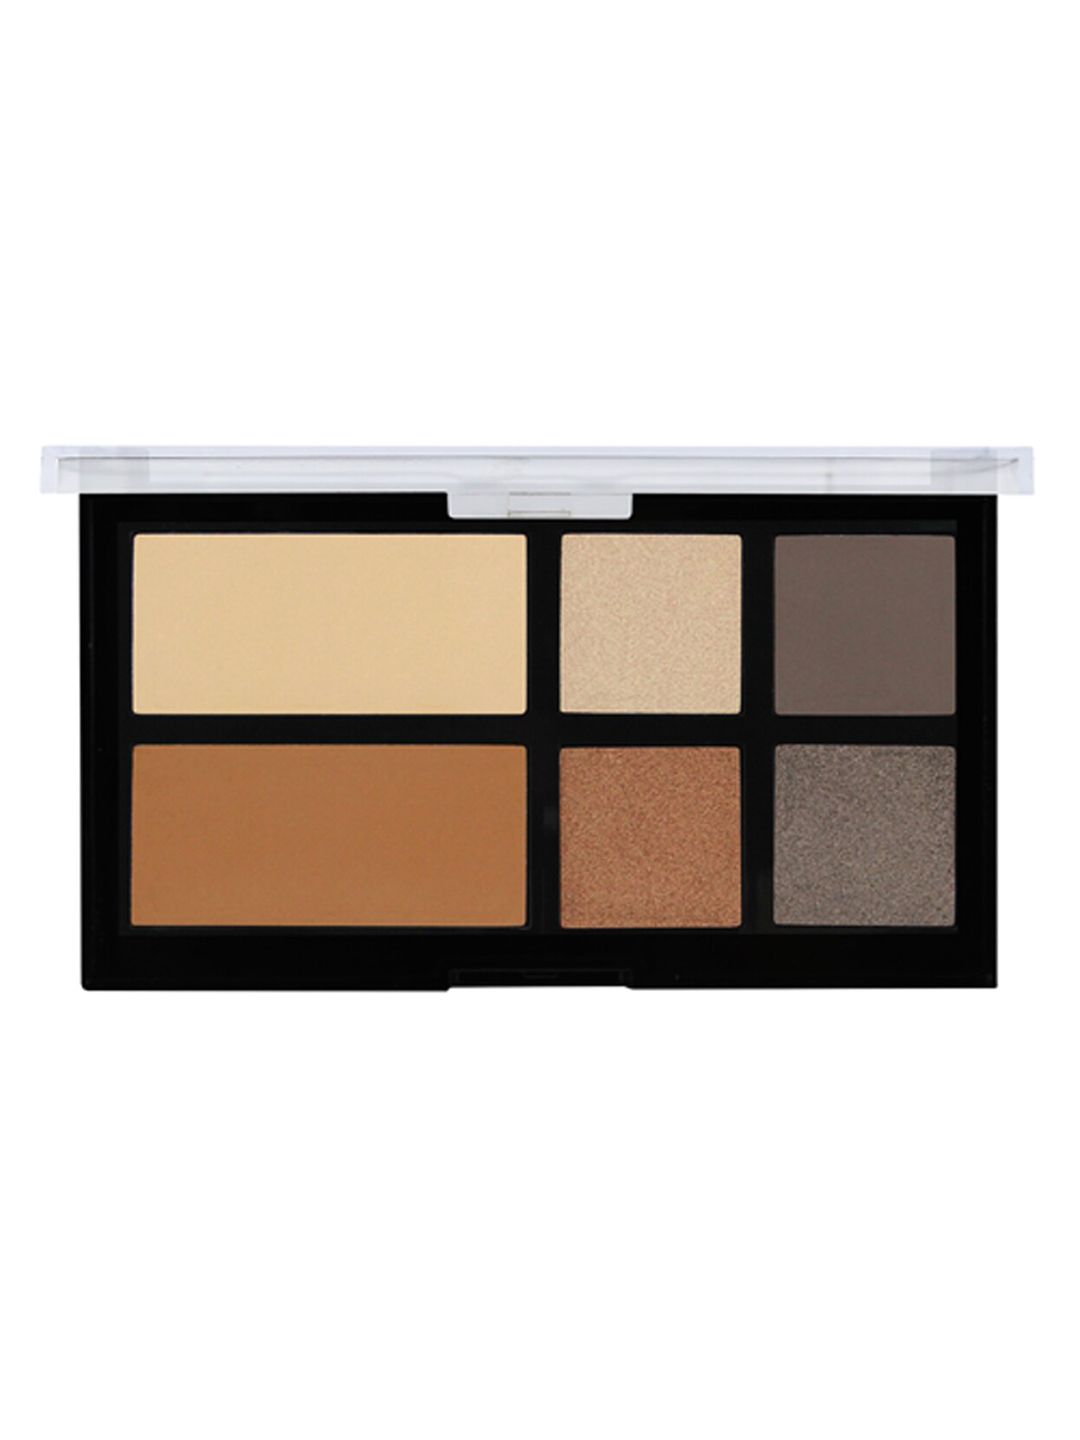 Sivanna Colors Contour, Highlight & Eyeshadow Palette - HF365 02 Price in India